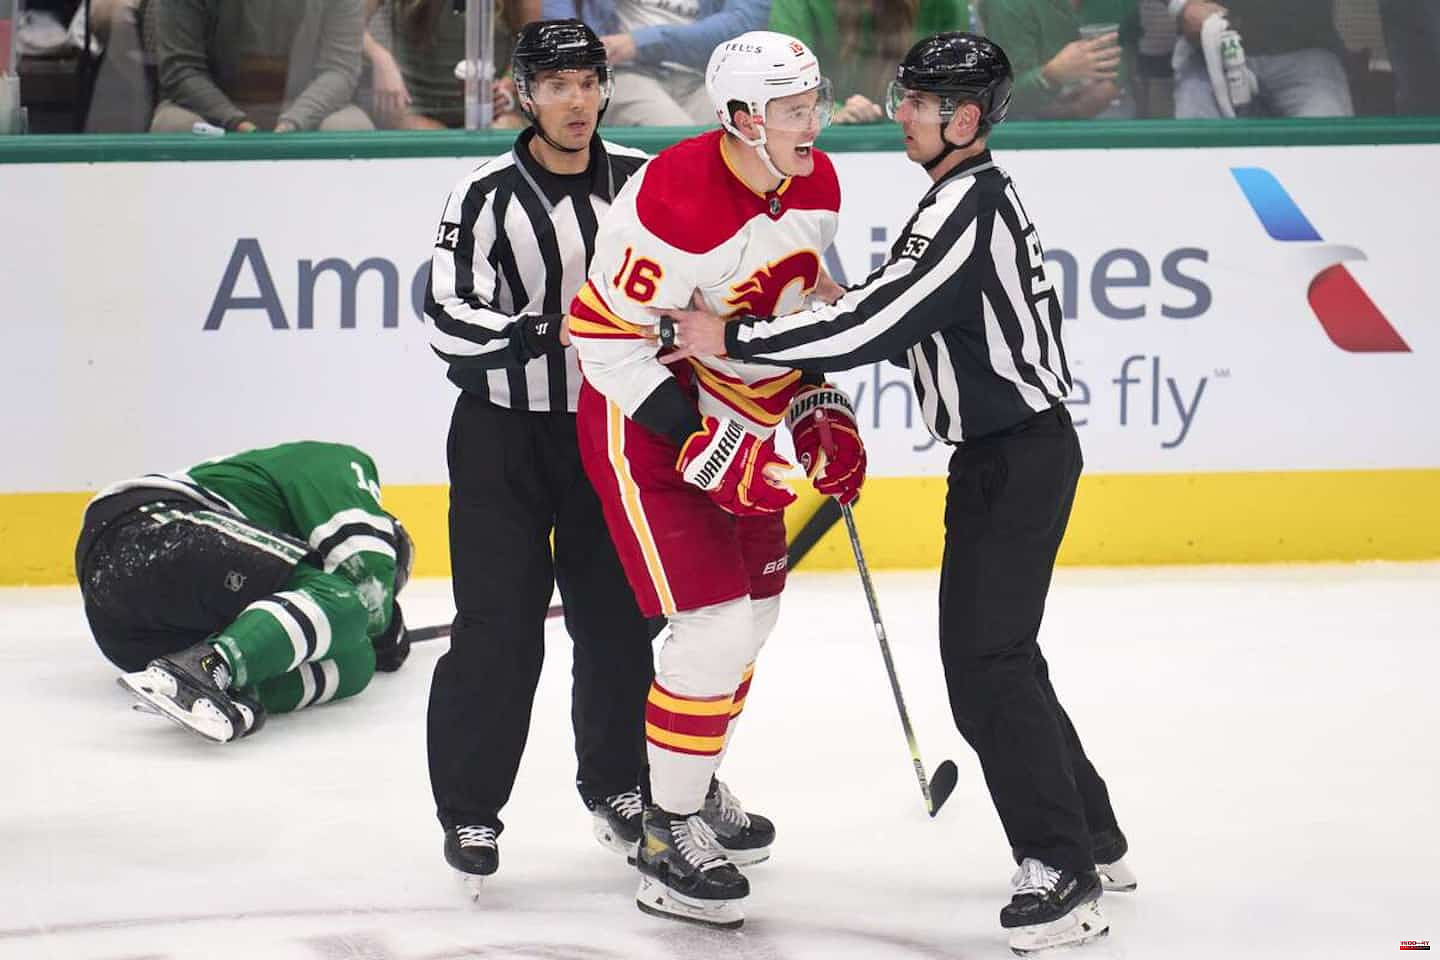 Nikita Zadorov gets away with it, the Stars motivated